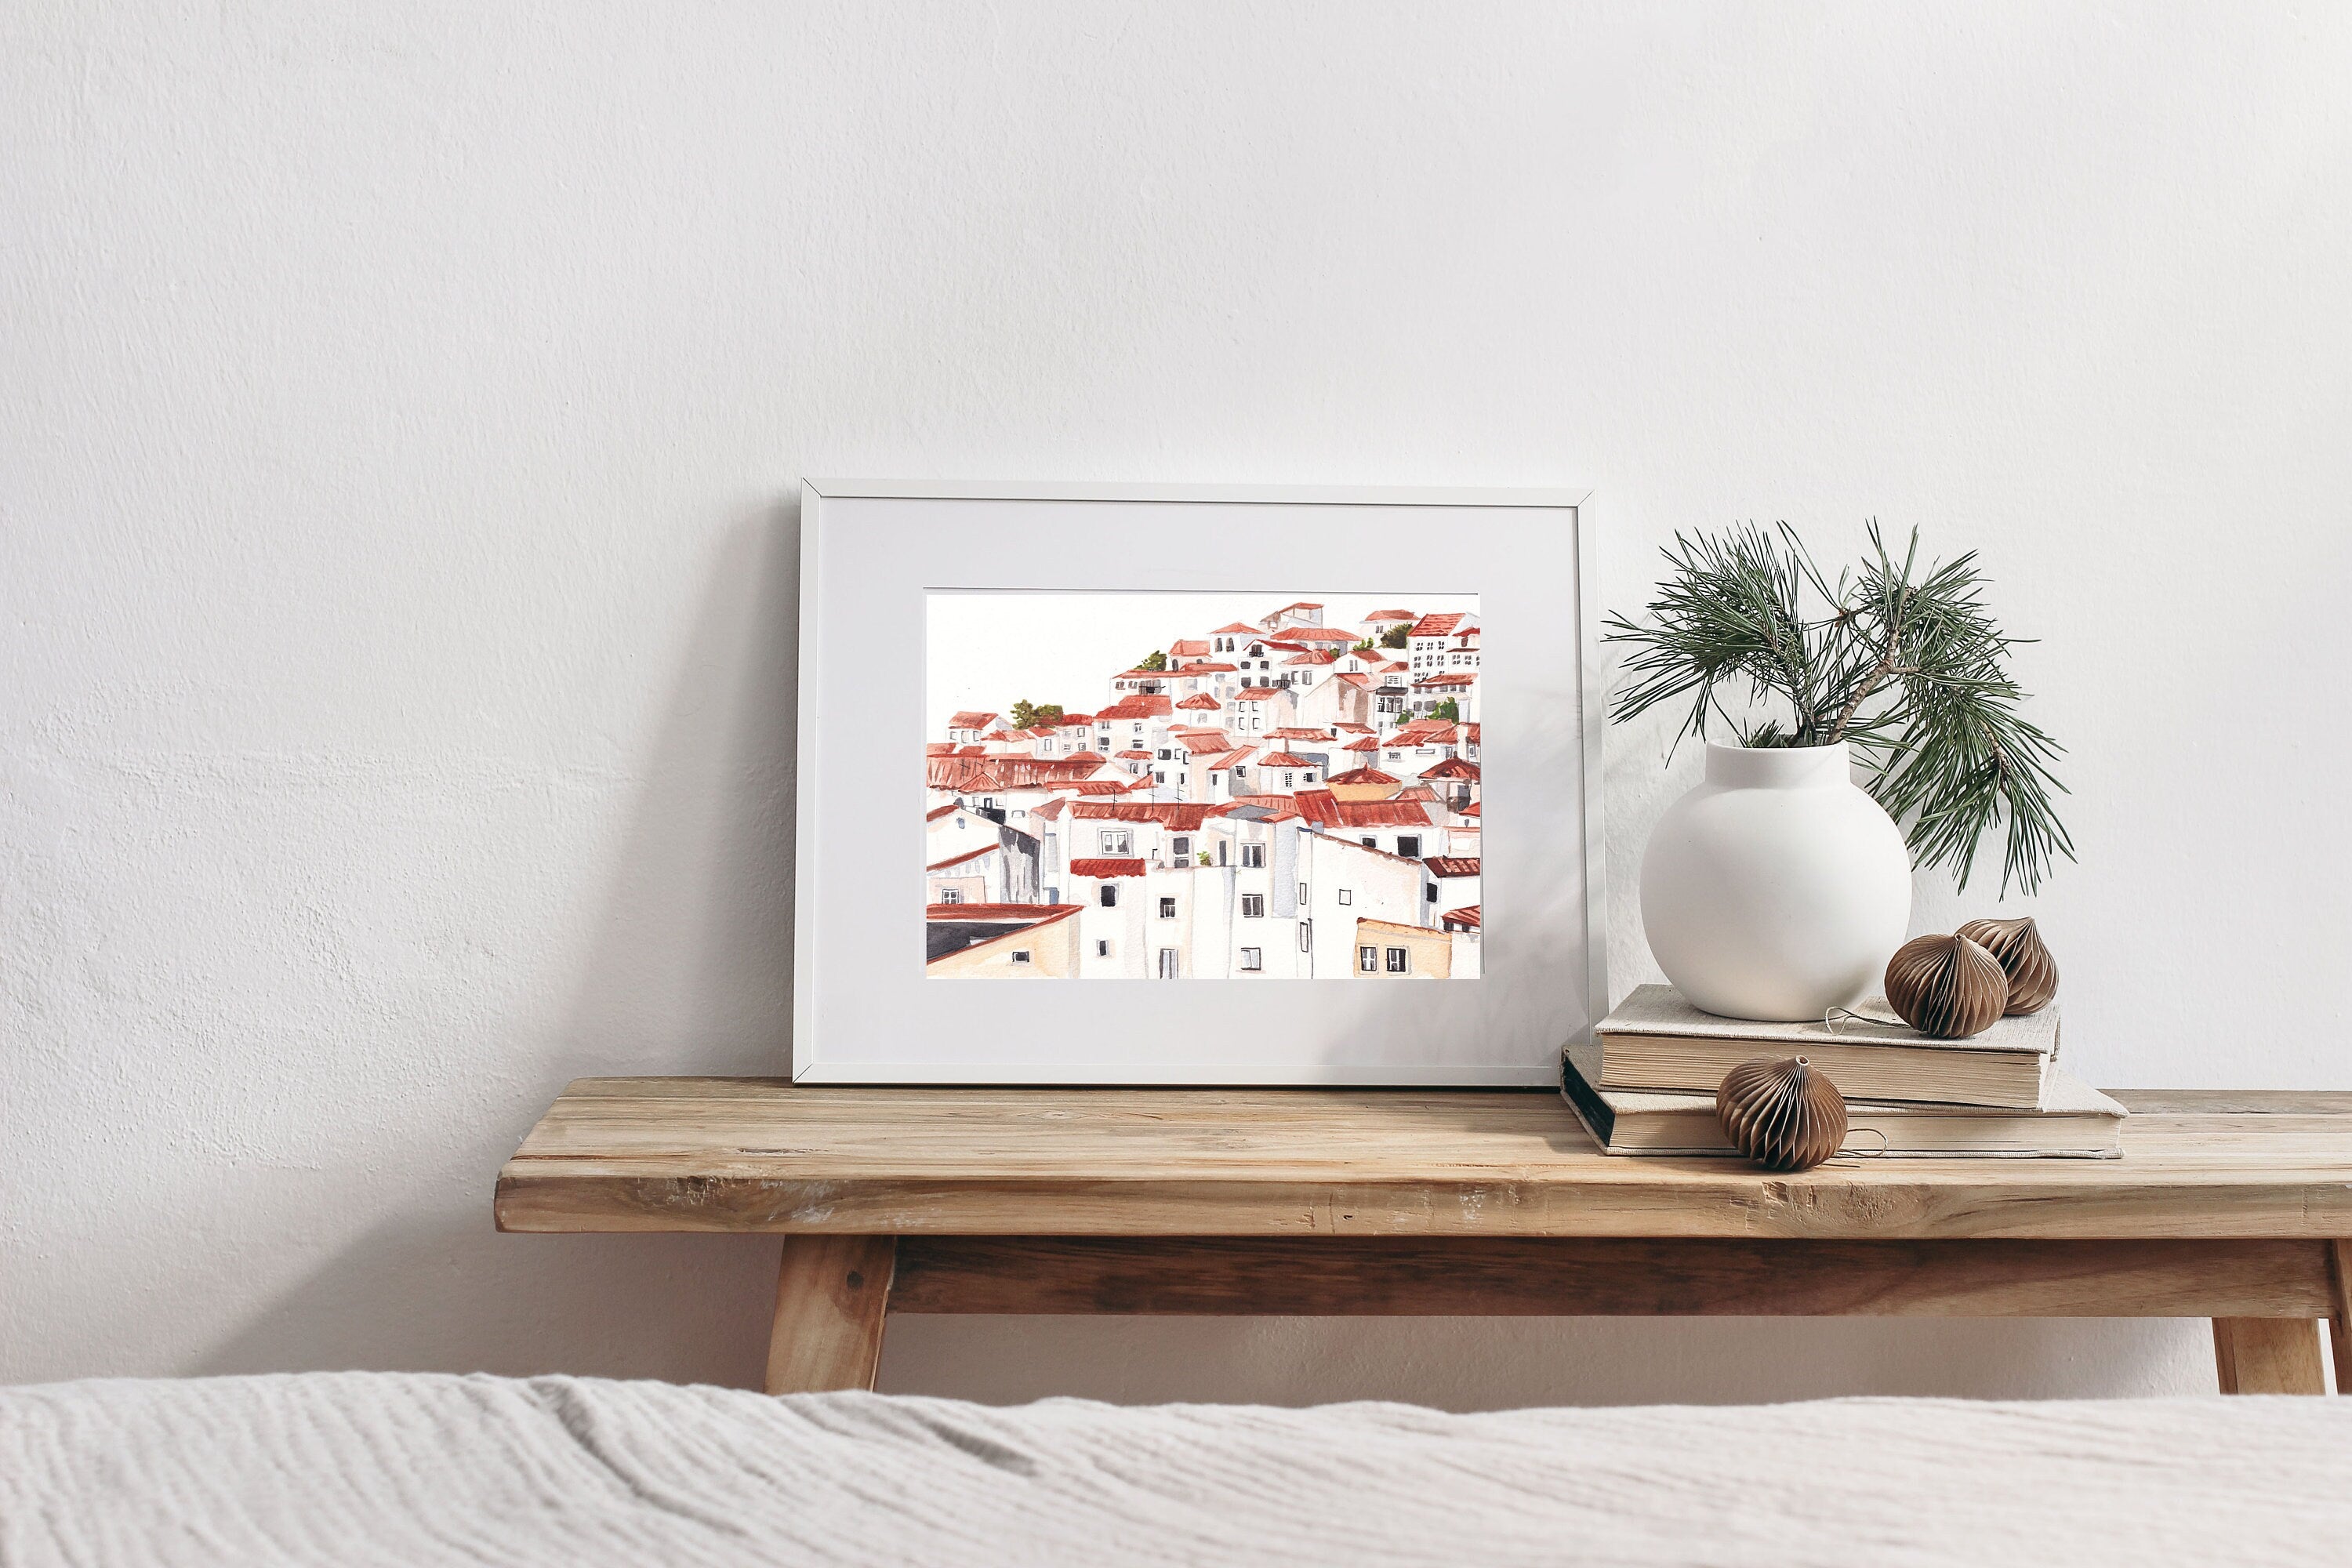 Amalfi coast village print of painting by Medjool Studio. Print of original gouache painting evoking the charm of an Italian coastal village. This neutral toned art print captures the traditional buildings and cliffs of the Amalfi coast.